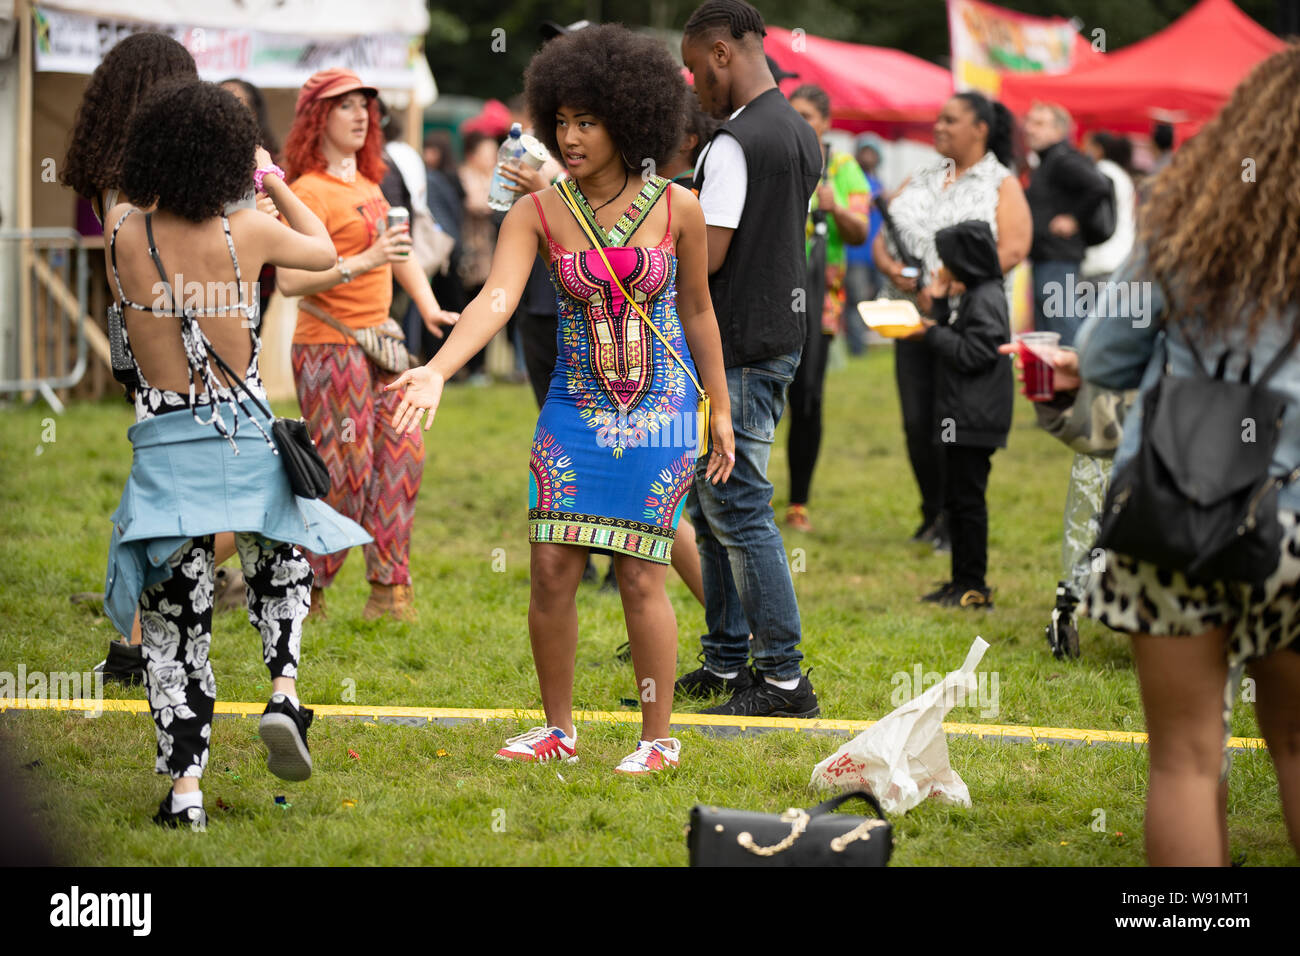 Manchester, UK. 11 AUG 2019. Manchester Caribbean Carnival. People attend the second day of the Manchester Caribbean Carnival. The theme of the annual event is diversity and inclusivity. Credit: Jonathan Nicholson/Alamy Live News. Stock Photo